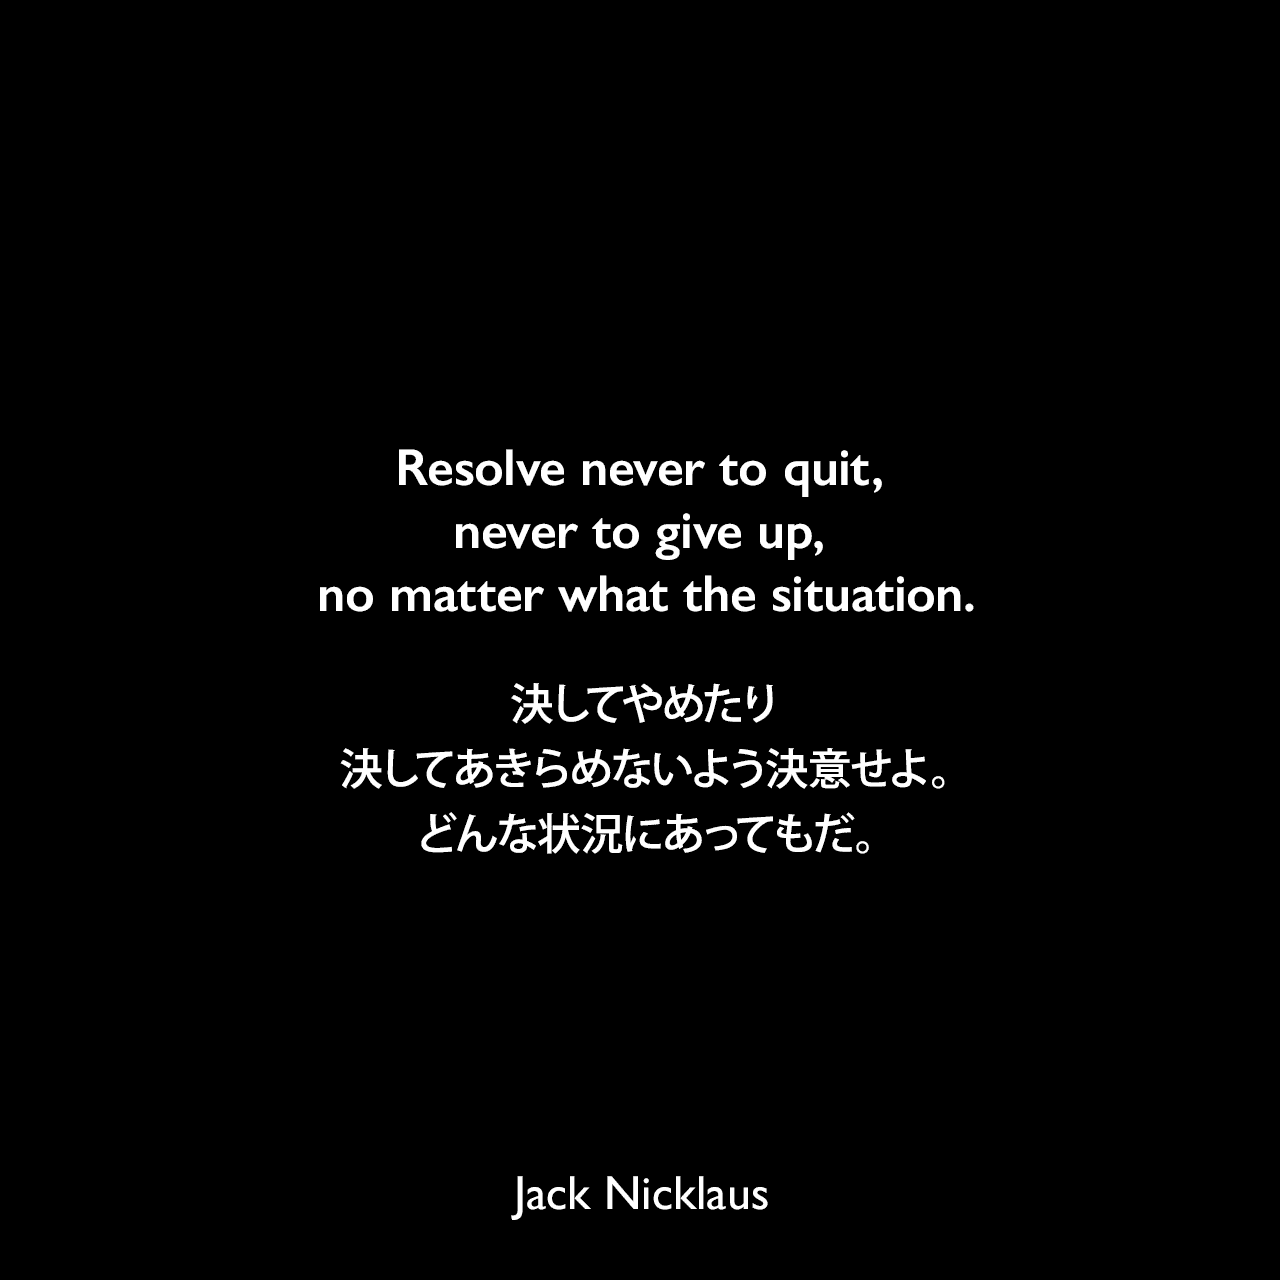 Resolve never to quit, never to give up, no matter what the situation.決してやめたり、決してあきらめないよう決意せよ。どんな状況にあってもだ。Jack Nicklaus